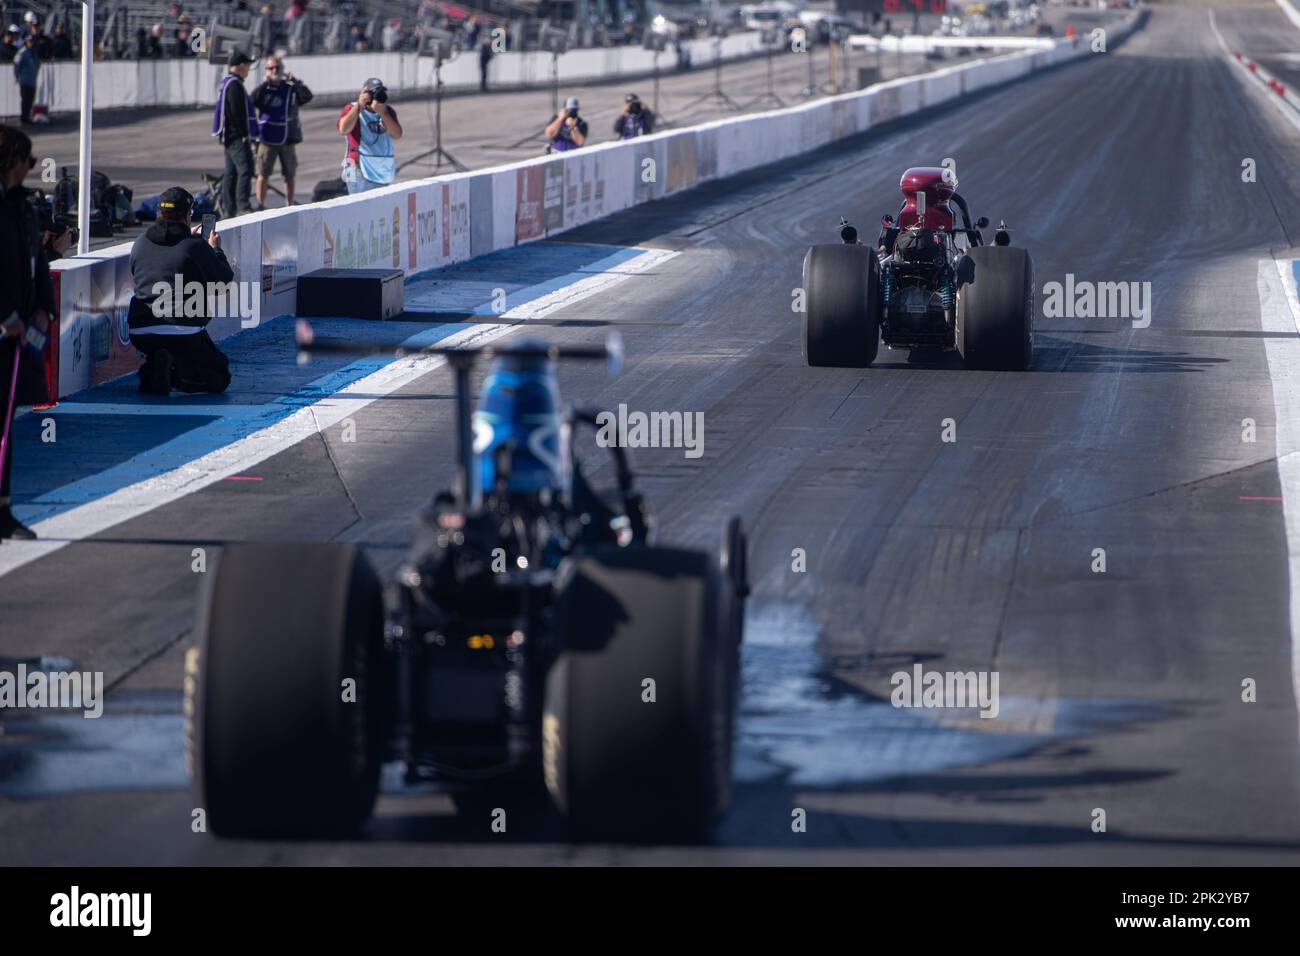 Pomona, United States. 31st Mar, 2023. Drivers from the Lucas Oil Wintrernational stage do practice runs before the days competition. Professional Drag racers nationwide rally together to compete at the Lucas Oil NHRA Winternationals held at the In-N-Out Burger Pomona Dragstrip for the 63rd consecutive year. Drivers battled over a three-day period starting on March 31st and concluding on April 2, fighting to take the titles in each of their divisions. (Photo by Jon Putman/SOPA Images/Sipa USA) Credit: Sipa USA/Alamy Live News Stock Photo